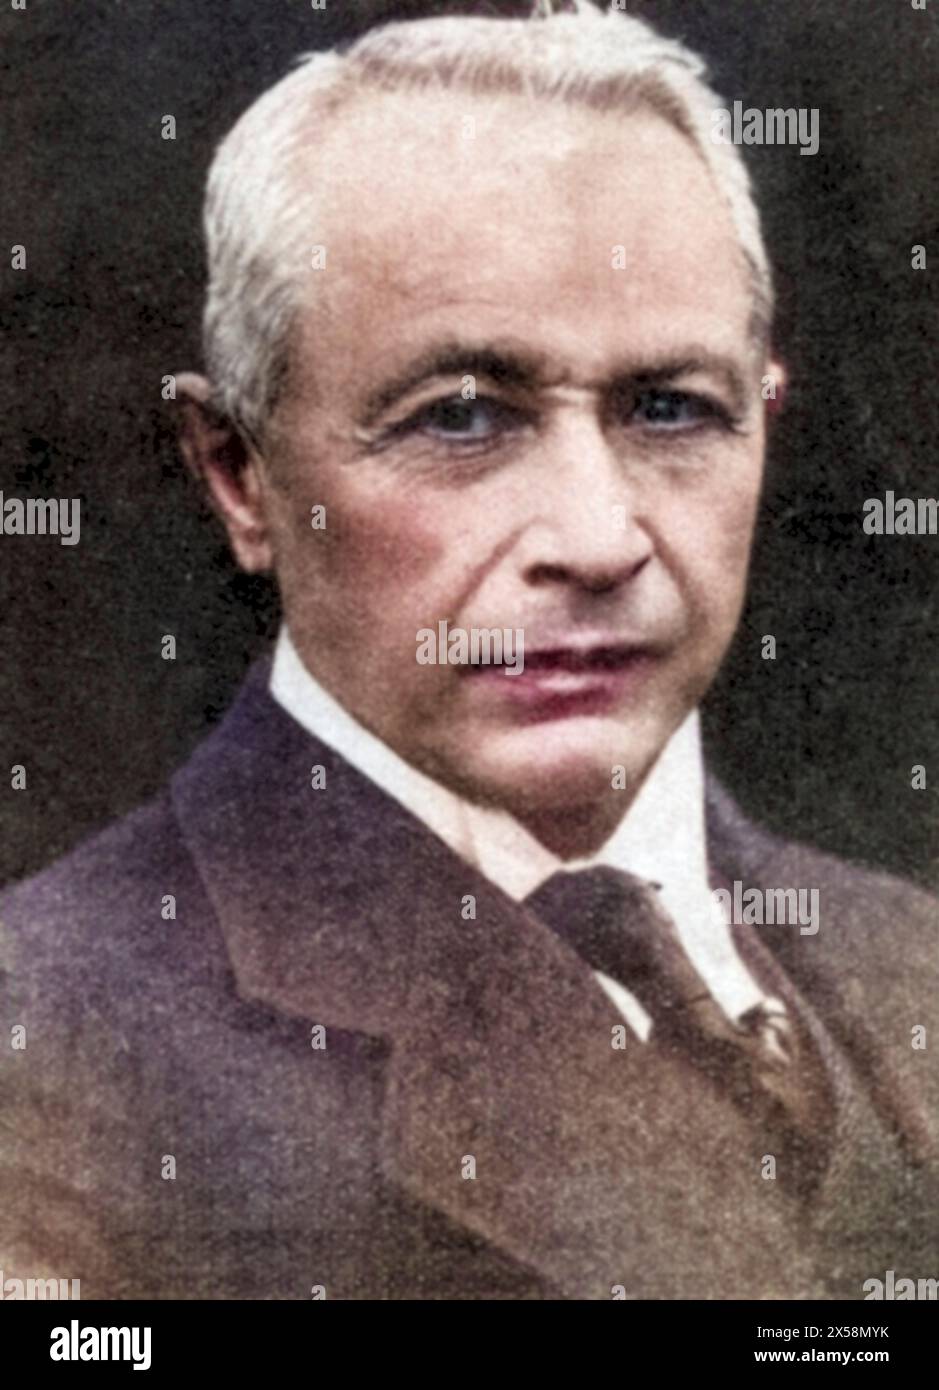 Junkers, Hugo  3.2.1856 - 3.2.1935, German engineer, industrialist, portrait, circa 1930, ADDITIONAL-RIGHTS-CLEARANCE-INFO-NOT-AVAILABLE Stock Photo